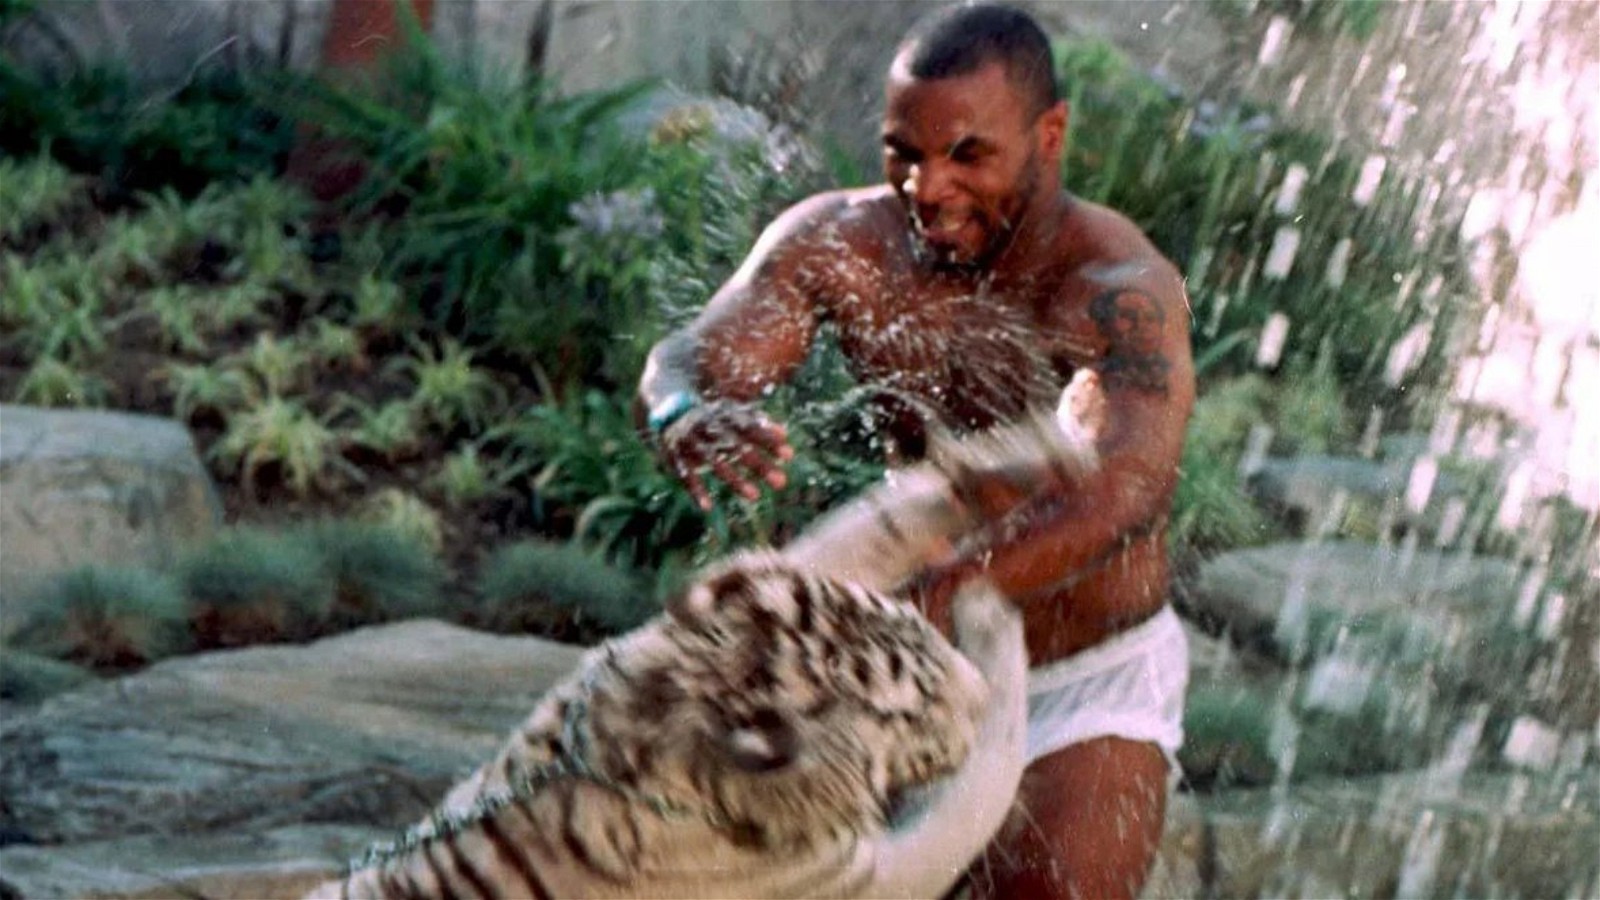 Mike Tyson along with his pet tiger